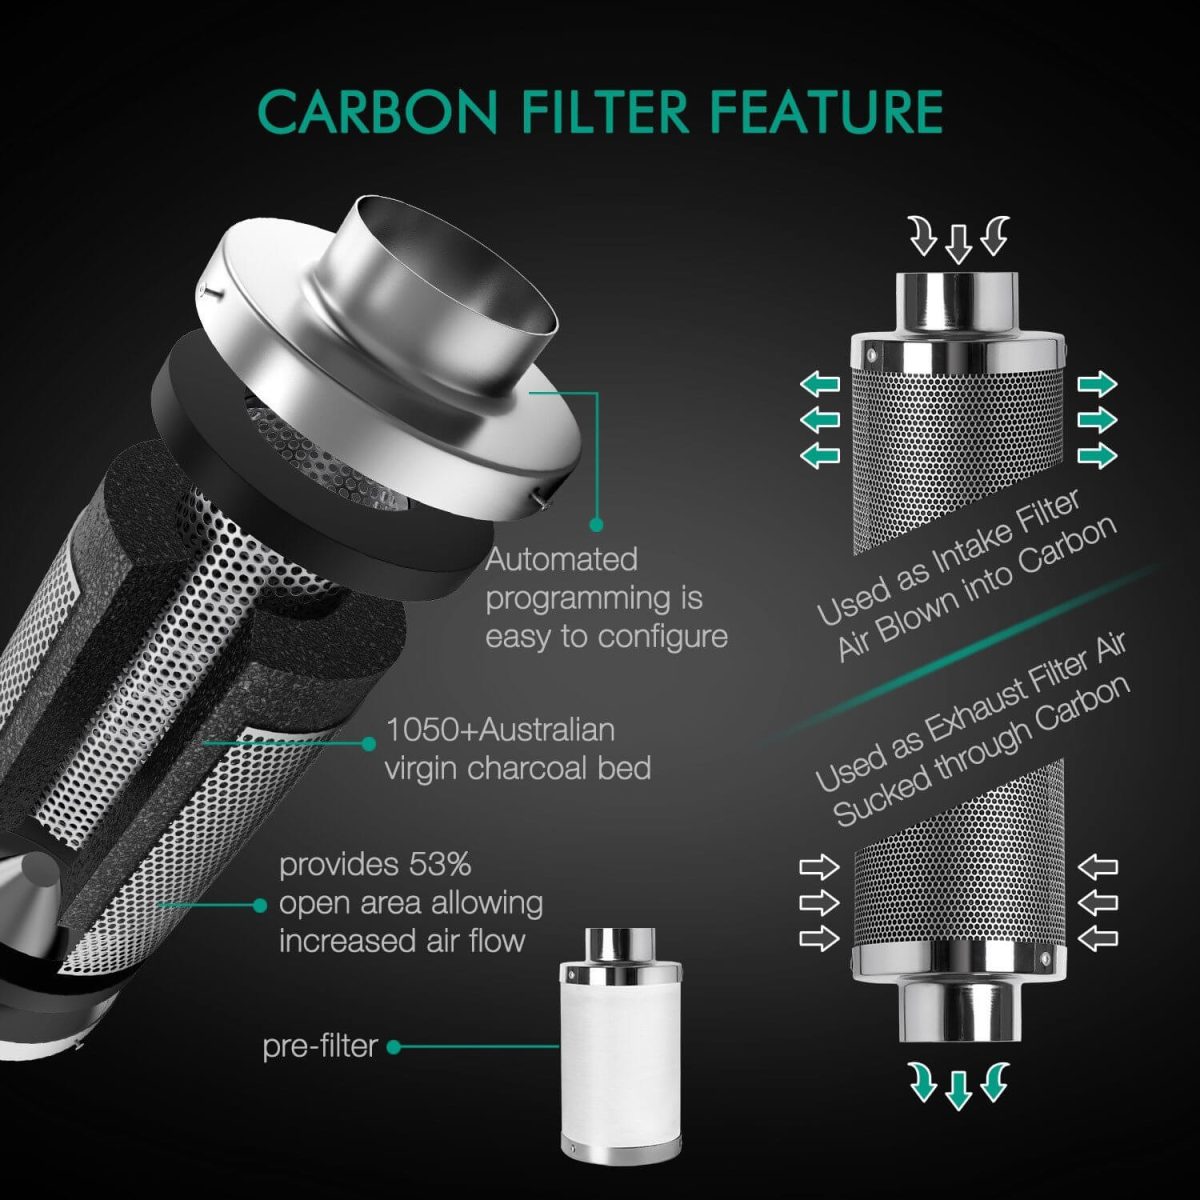 Mars Hydro carbon filter